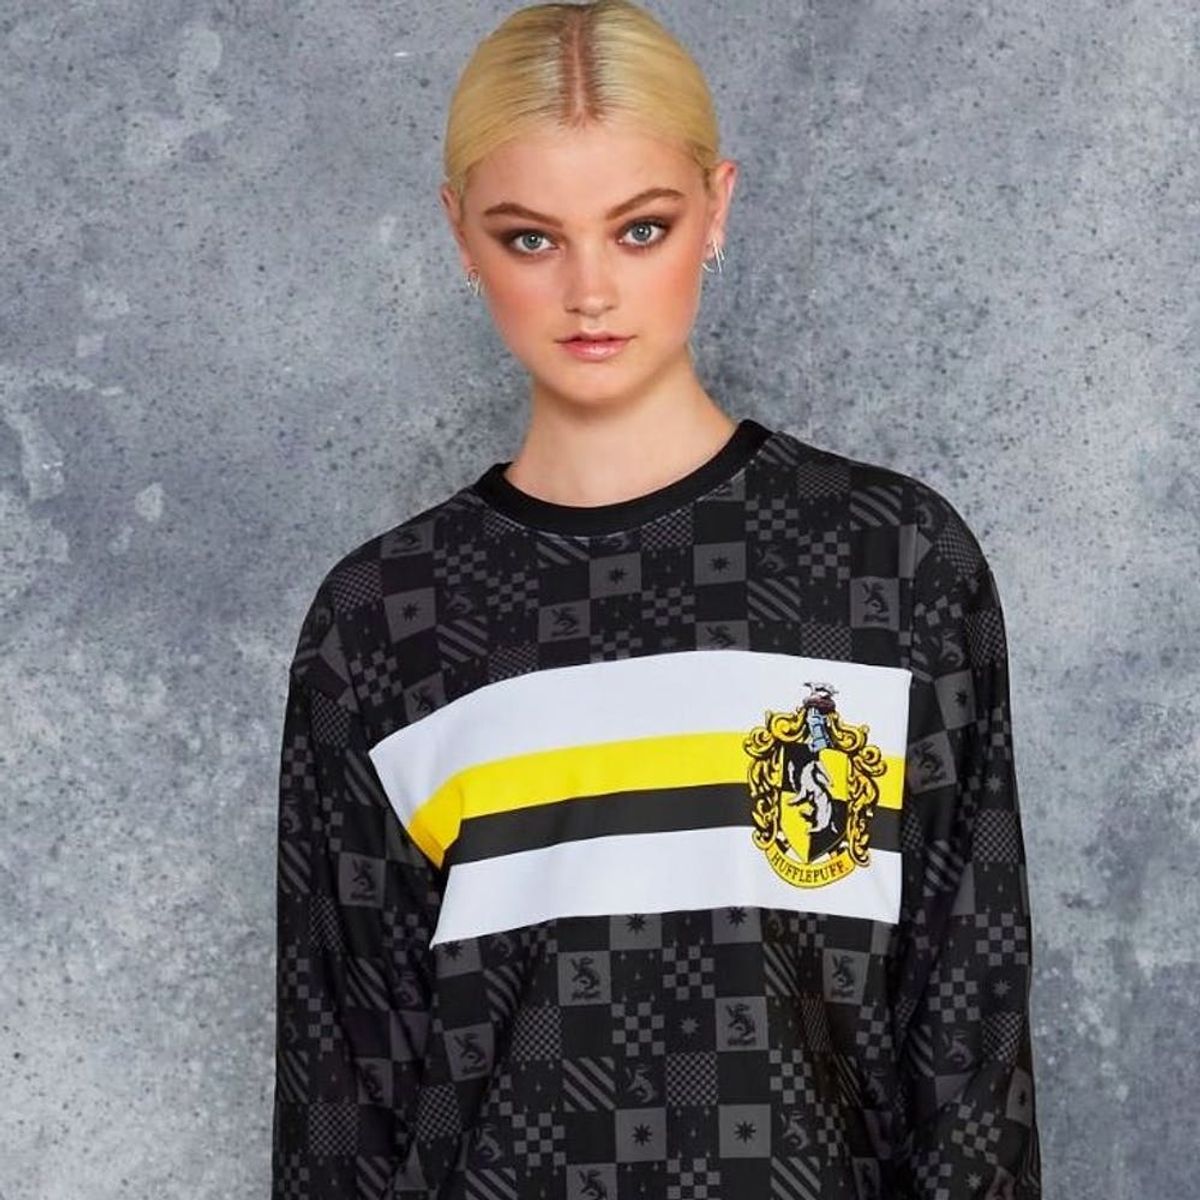 Black Milk Clothing’s Harry Potter Athleisure Collection Will Be Your New Go-To Quidditch Wear